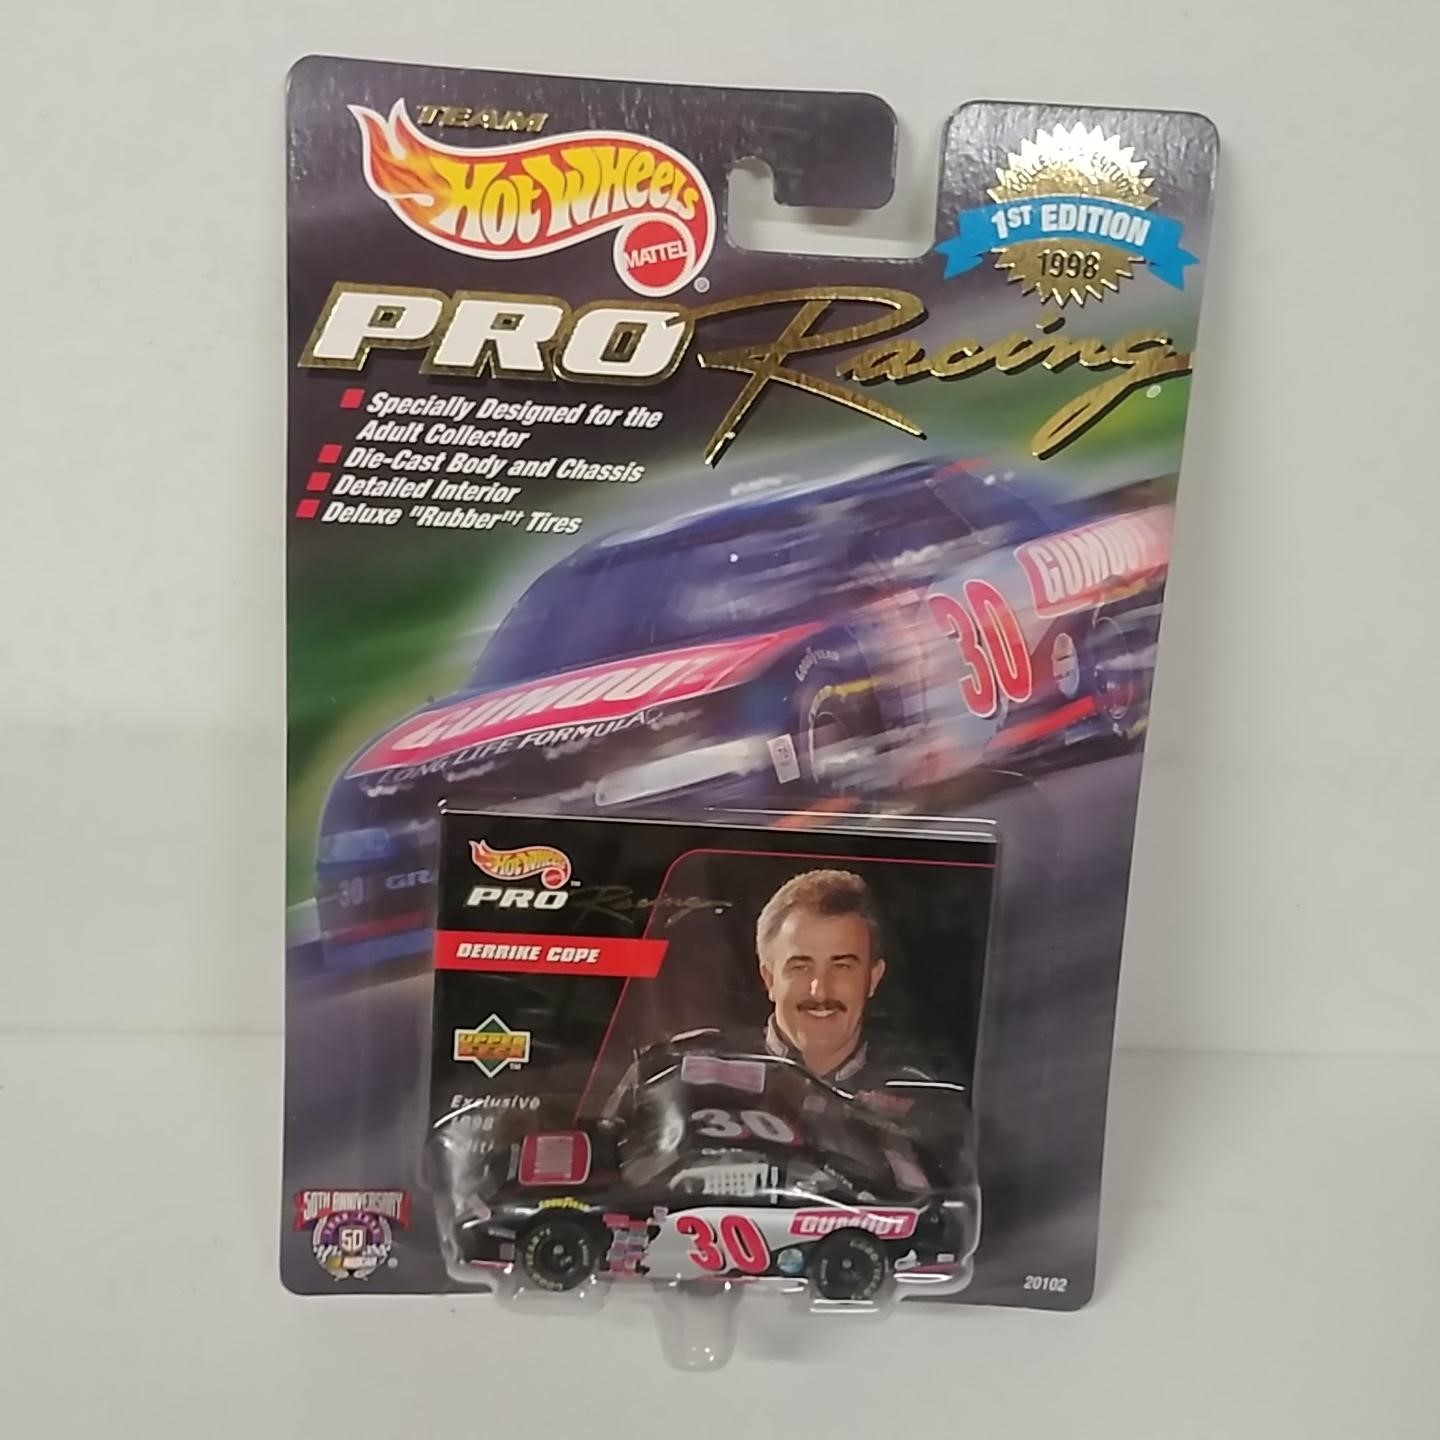 1998 Derrick Cope 1/64th Gum-Out car in blister pac